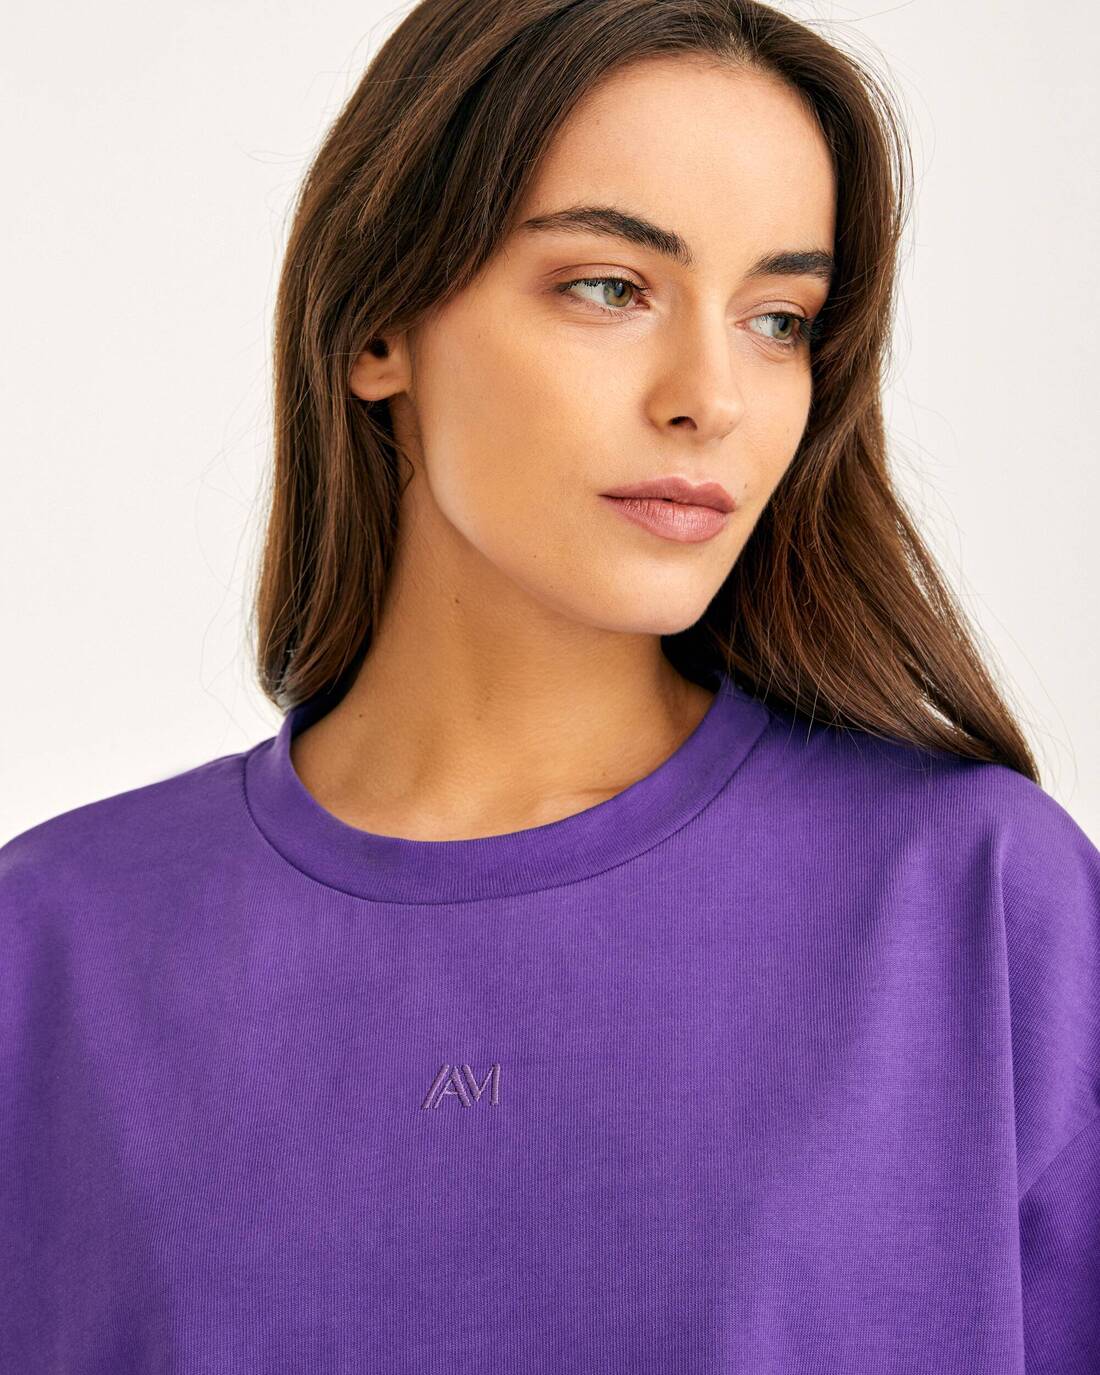 Extra-over thick cotton T-shirt 